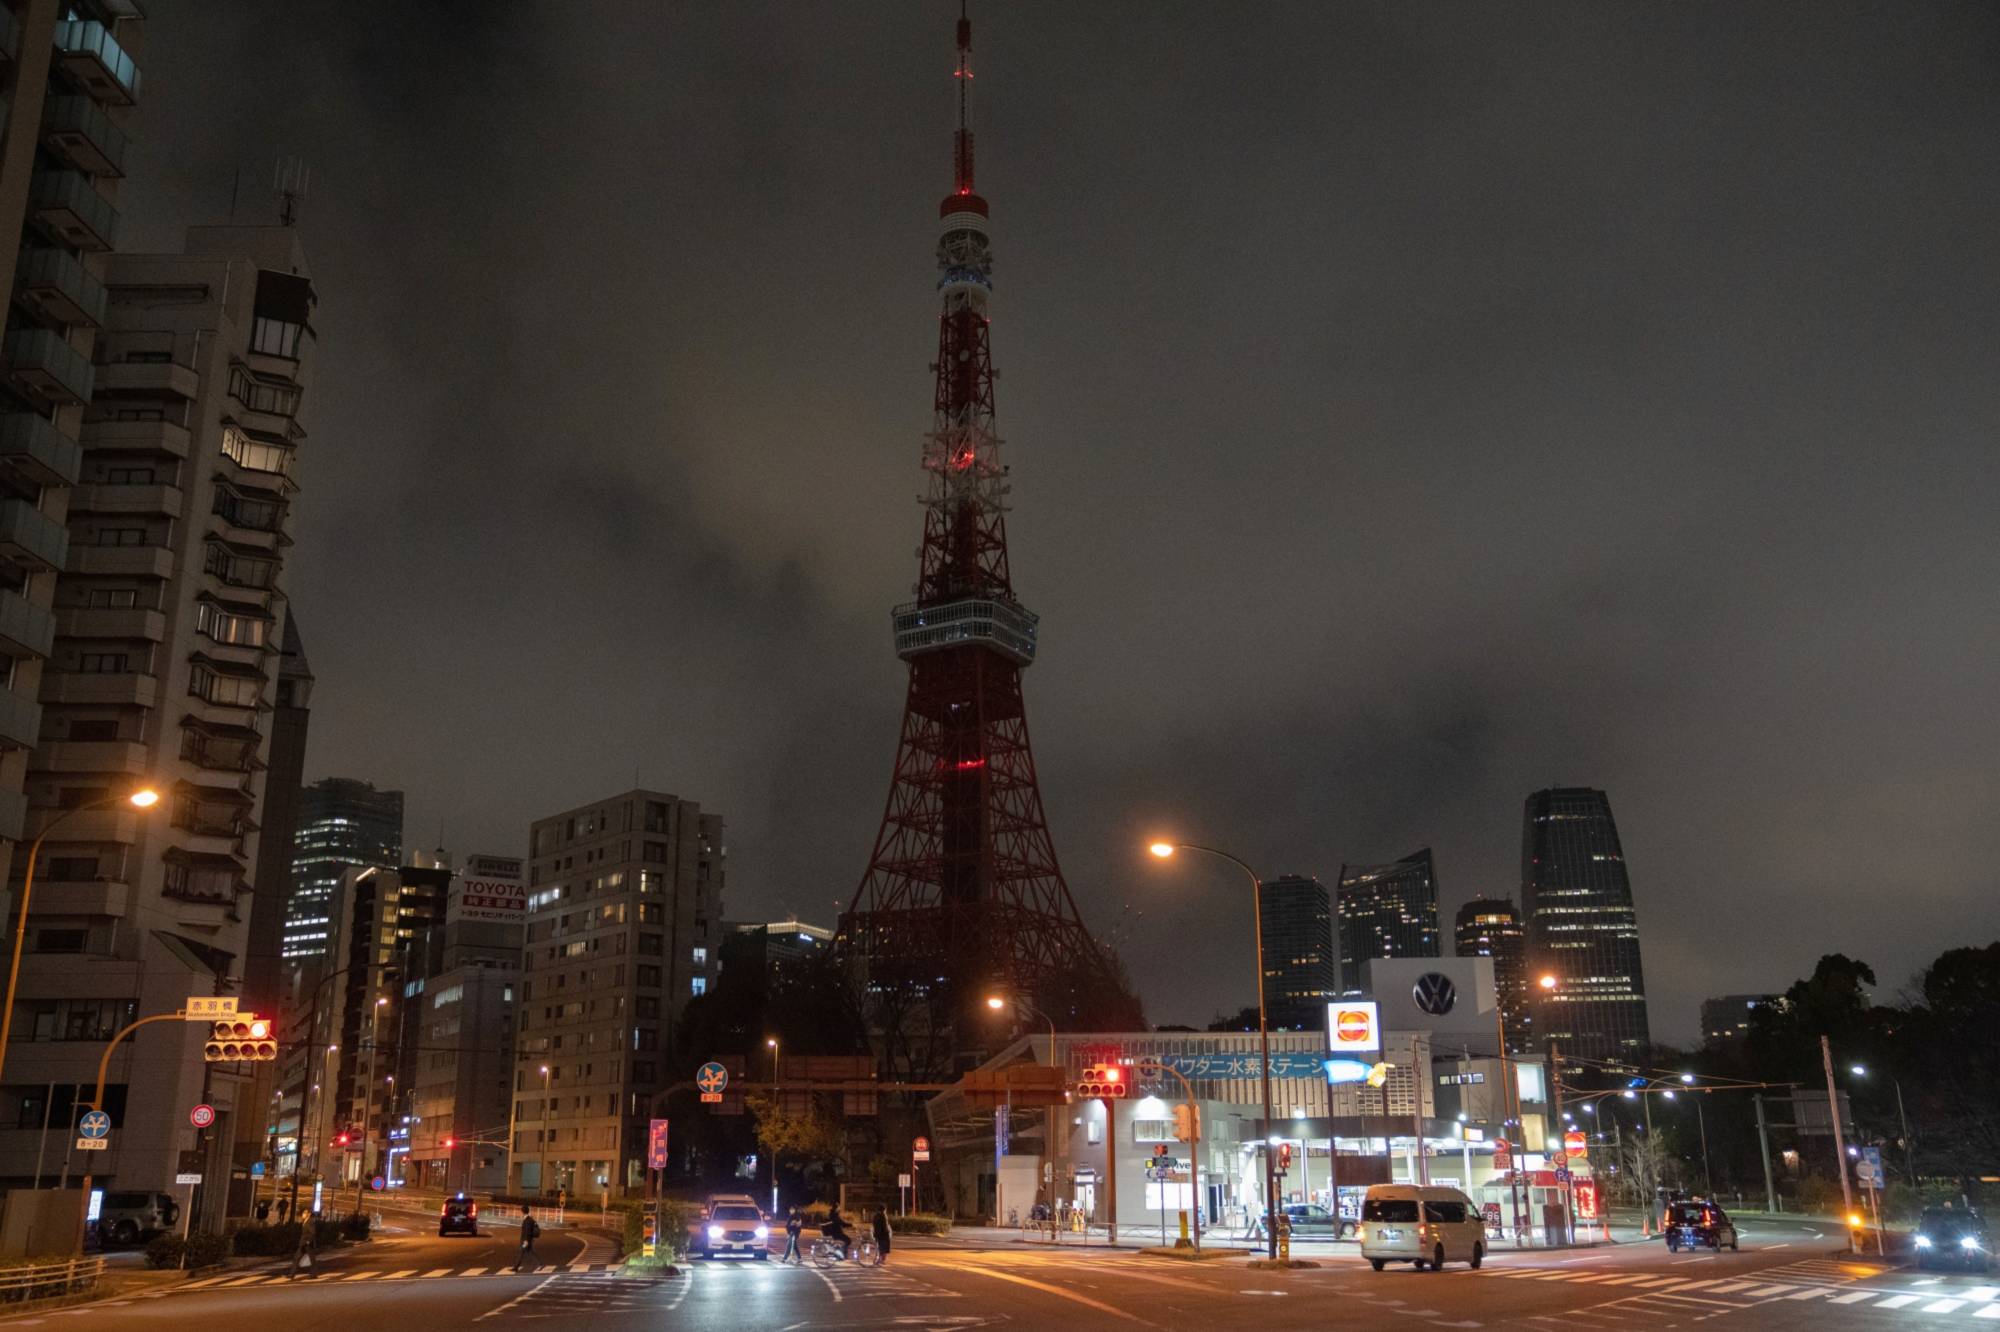 Tokyo Tower is unlit after the Tokyo Metropolitan Government turned off its lights to conserve energy on March 22. | BLOOMBERG